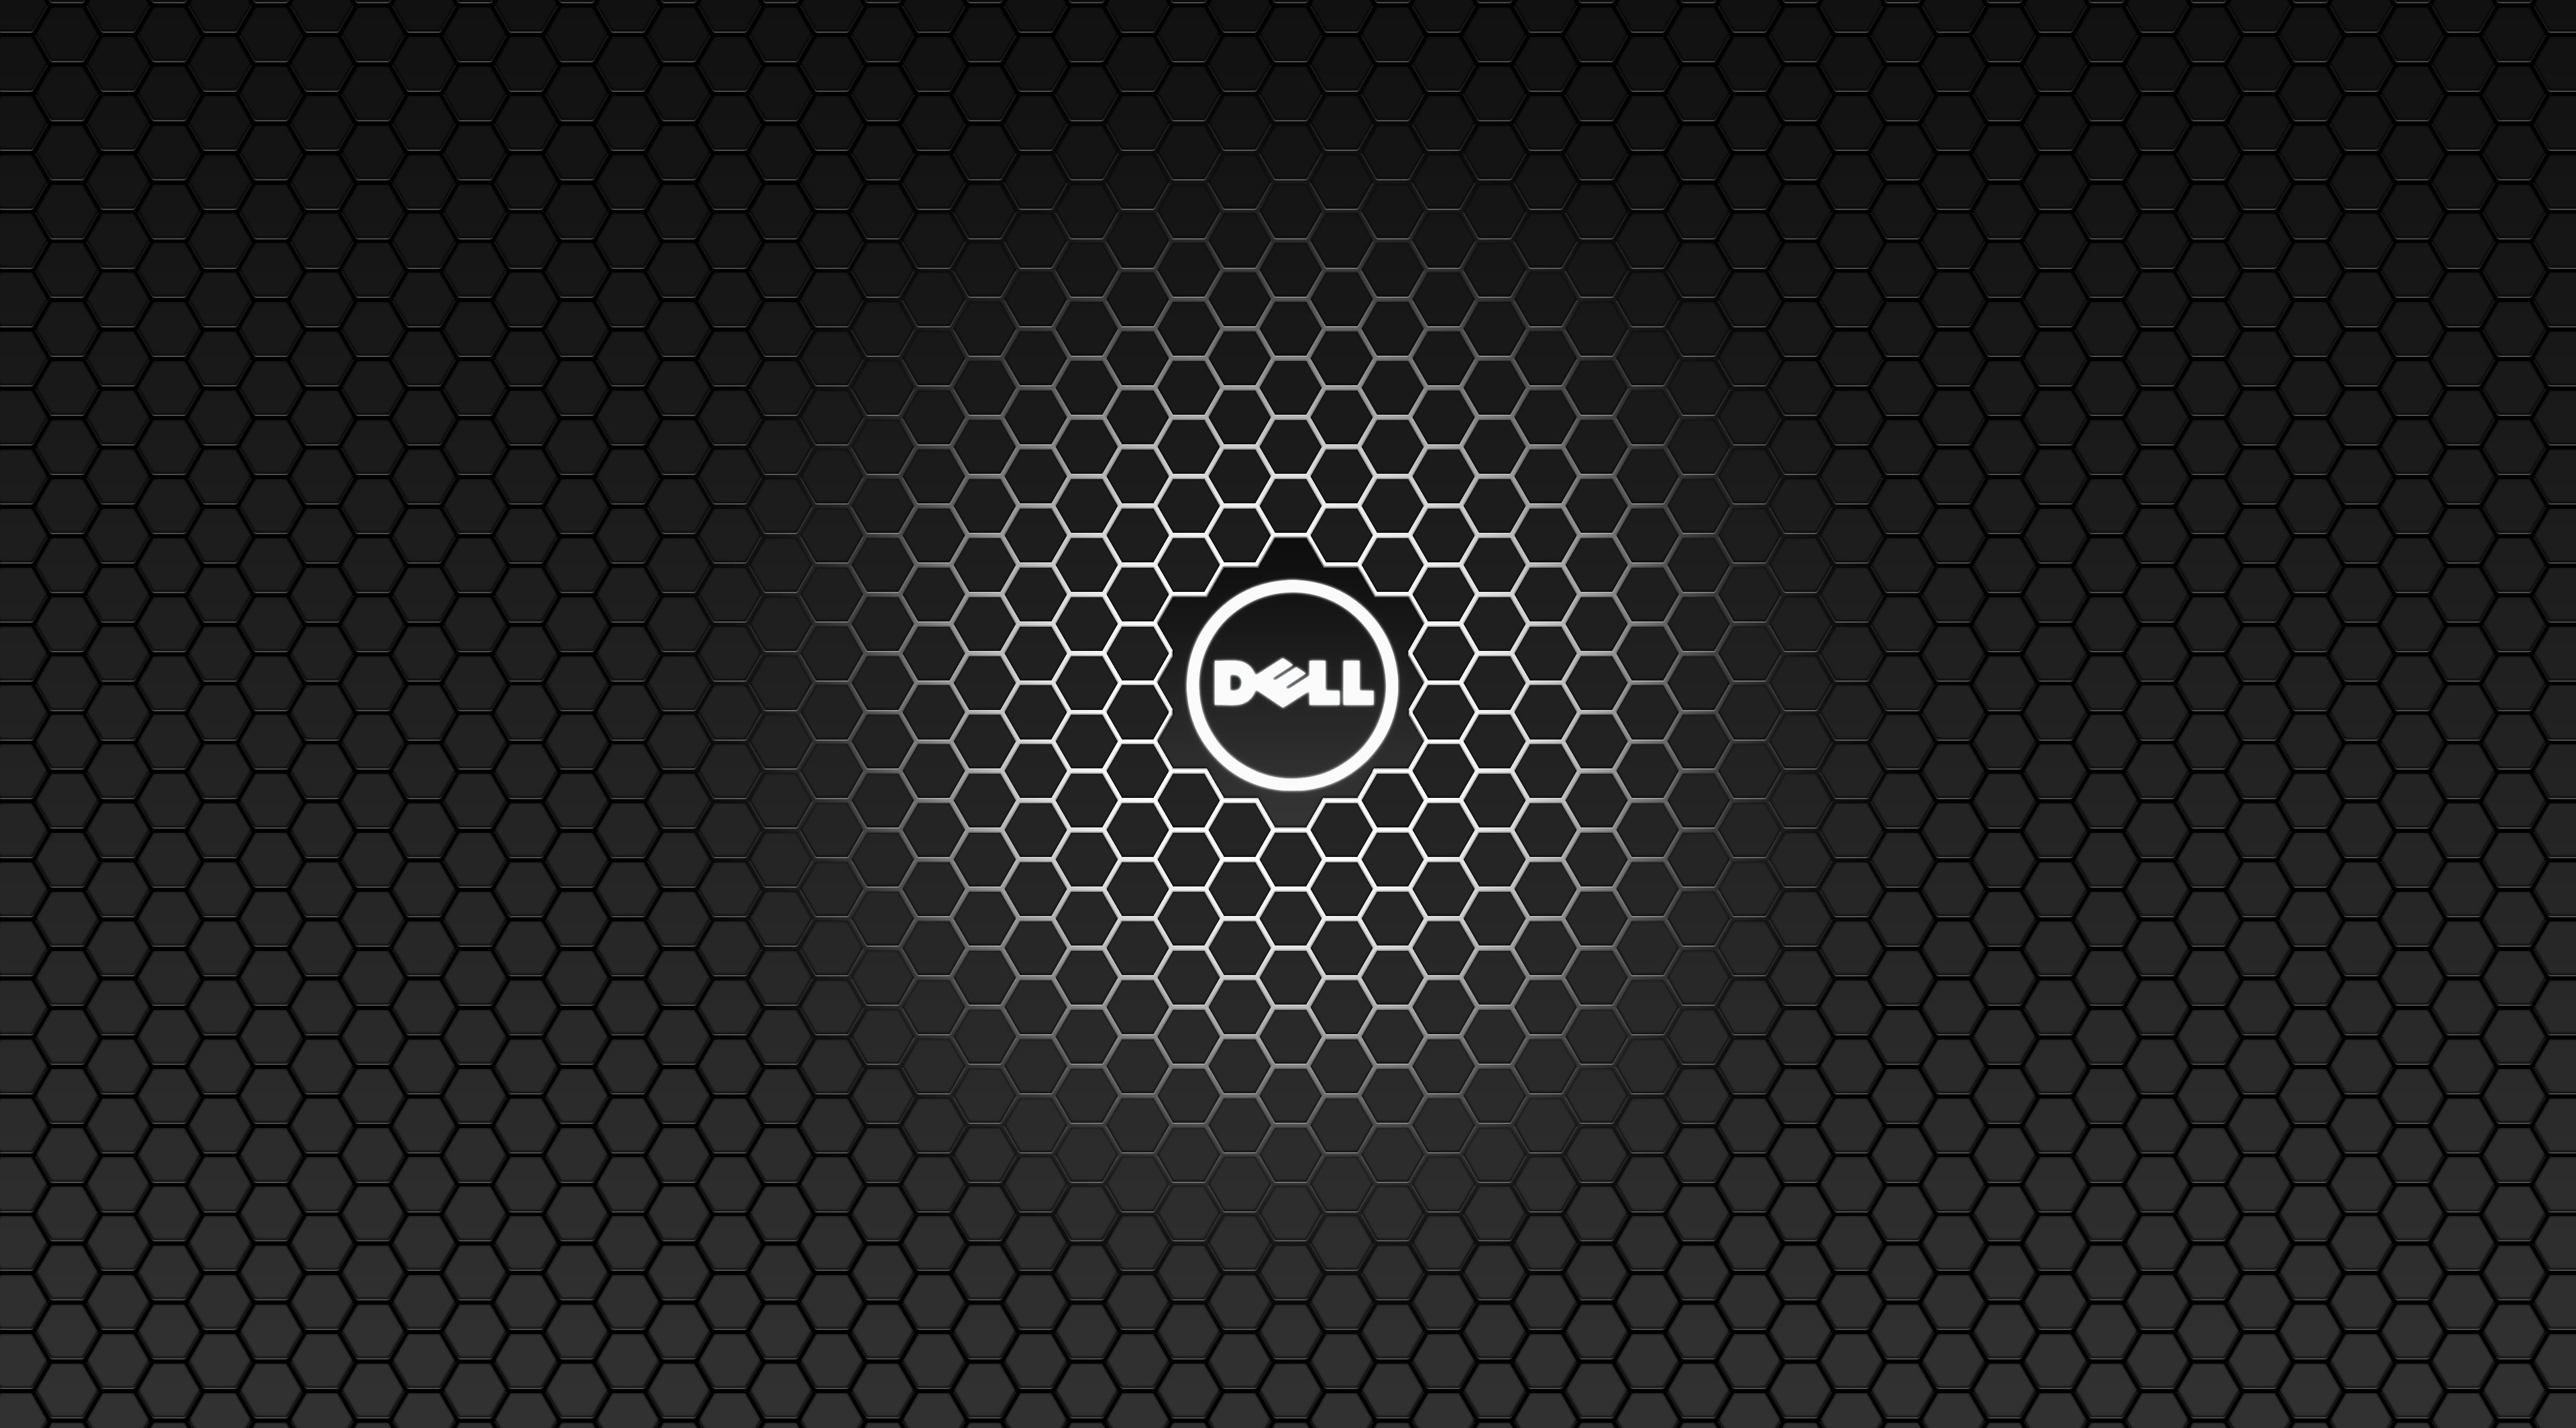 Dell wallpaper ·① Download free amazing wallpapers for ...